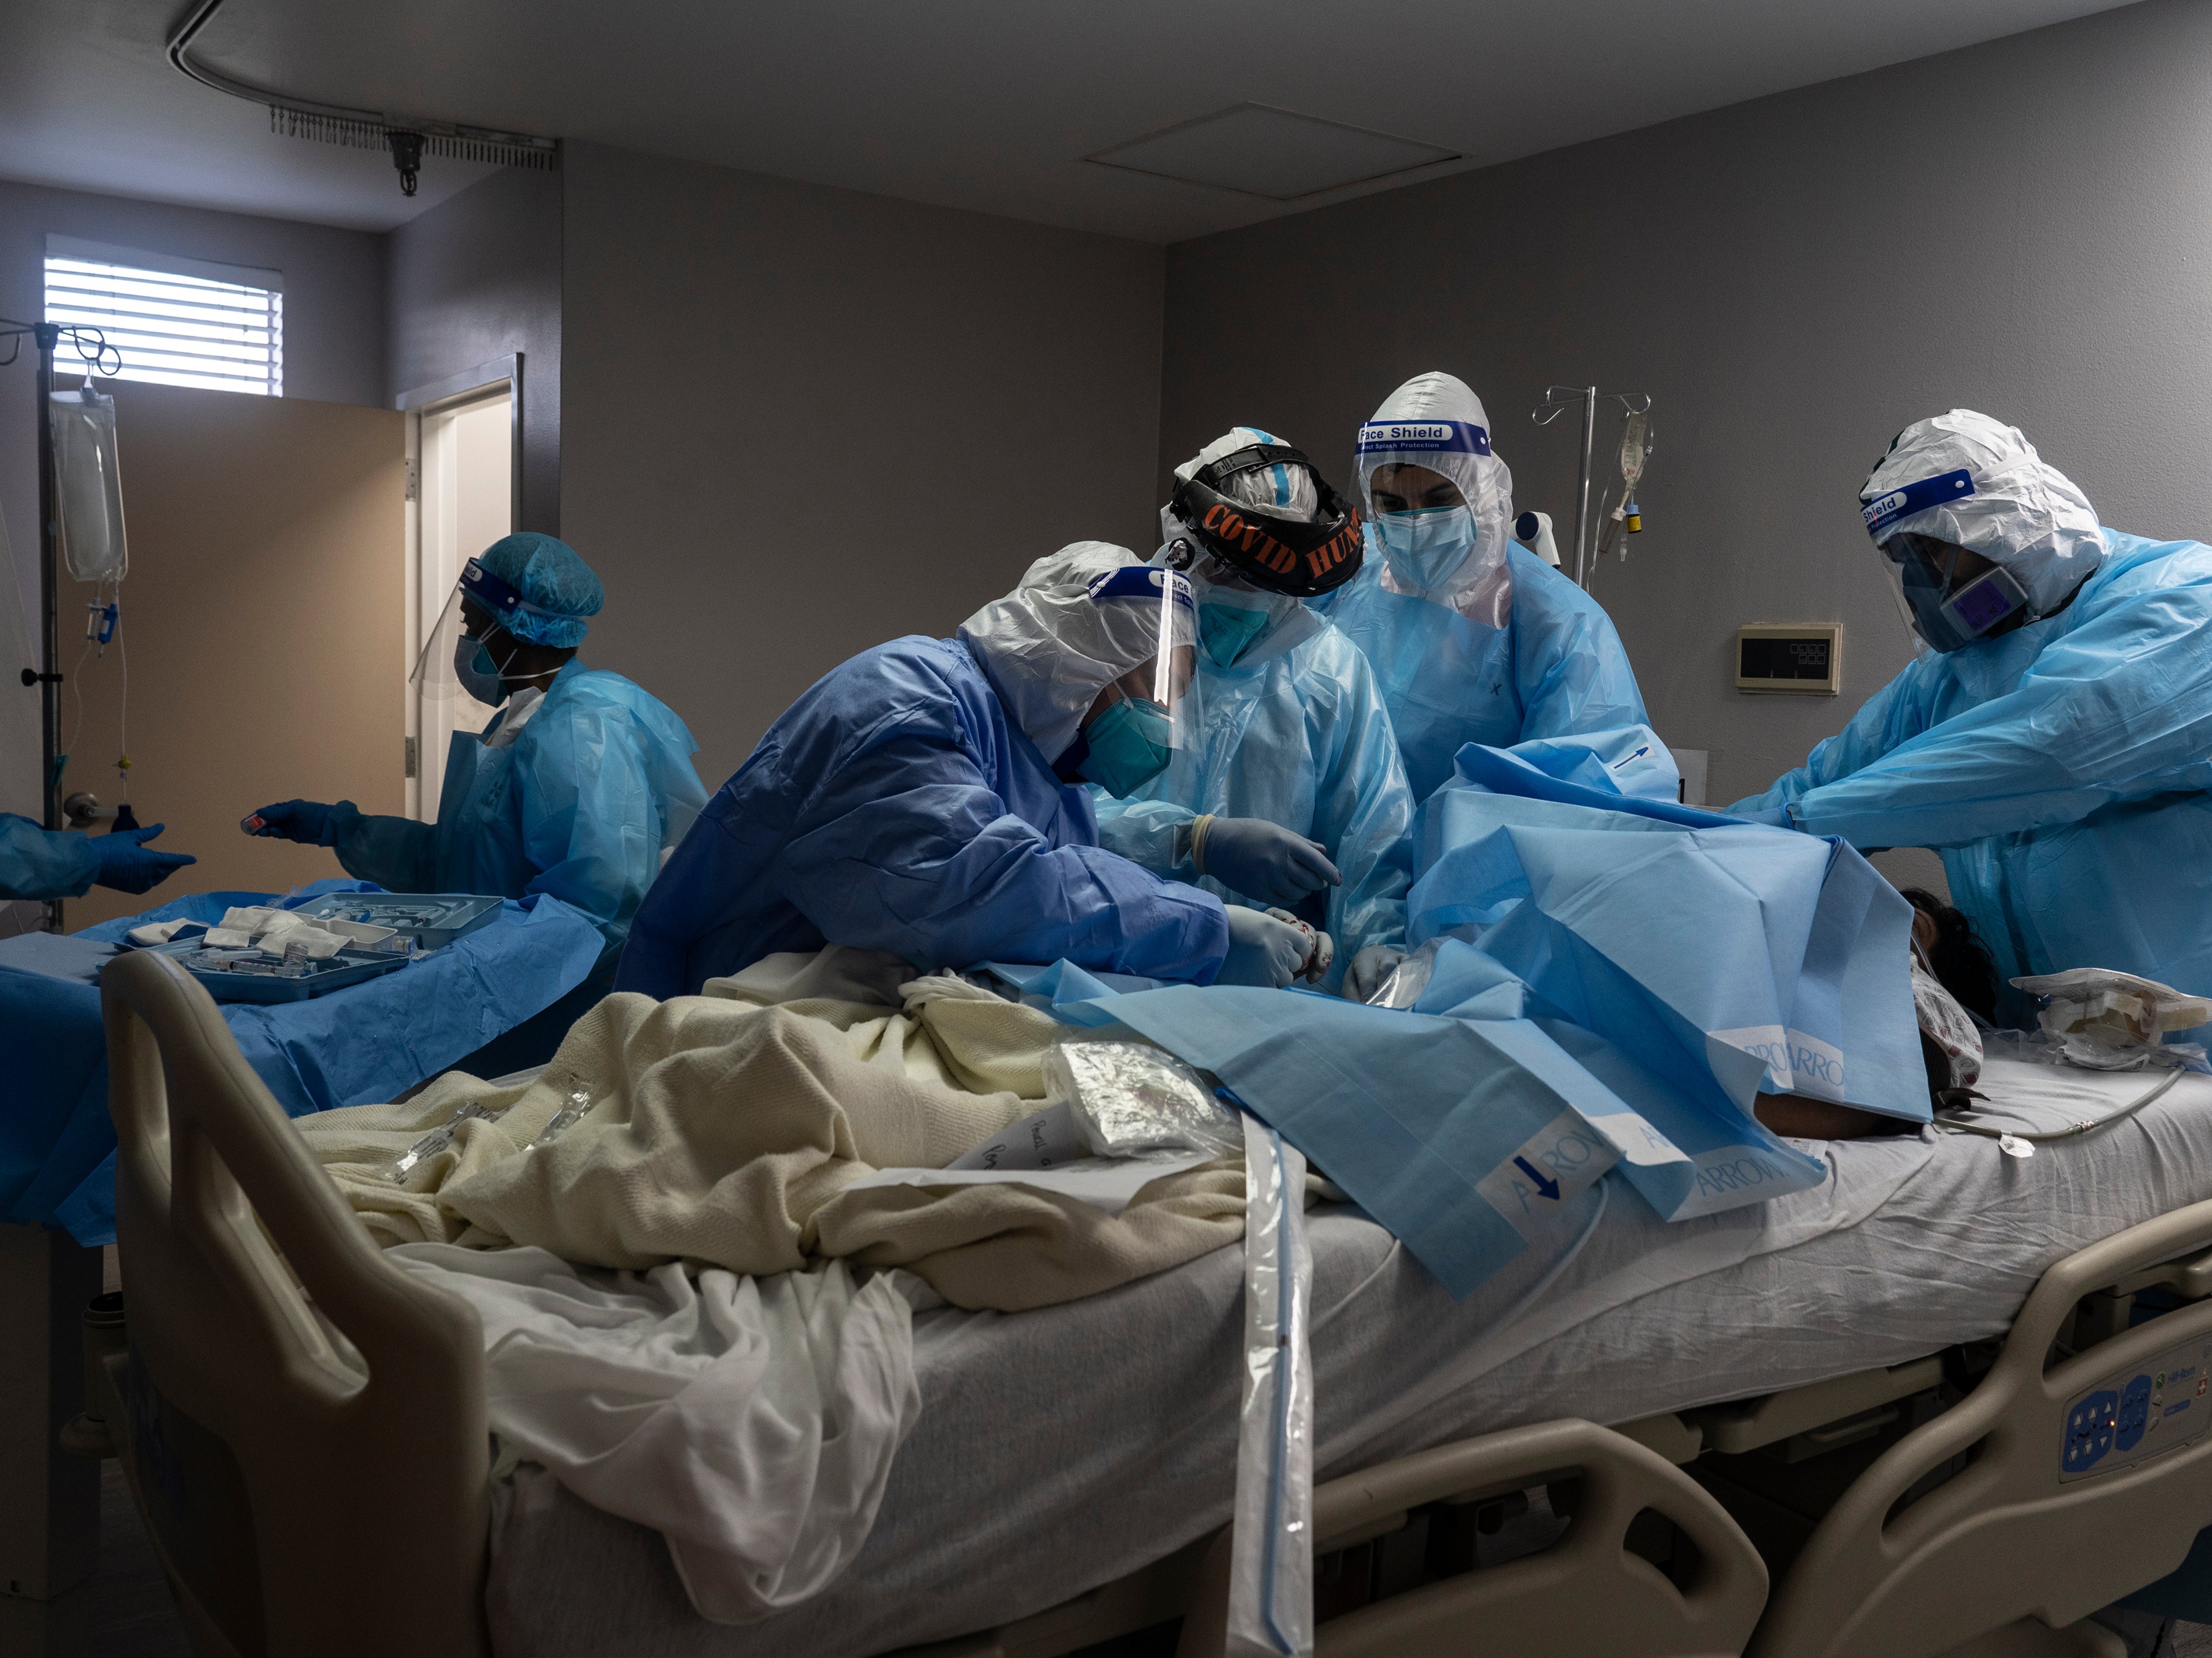 Medical staff members treat a patient suffering from coronavirus in the COVID-19 intensive care unit (ICU) at the United Memorial Medical Center (UMMC) in Houston, Texas